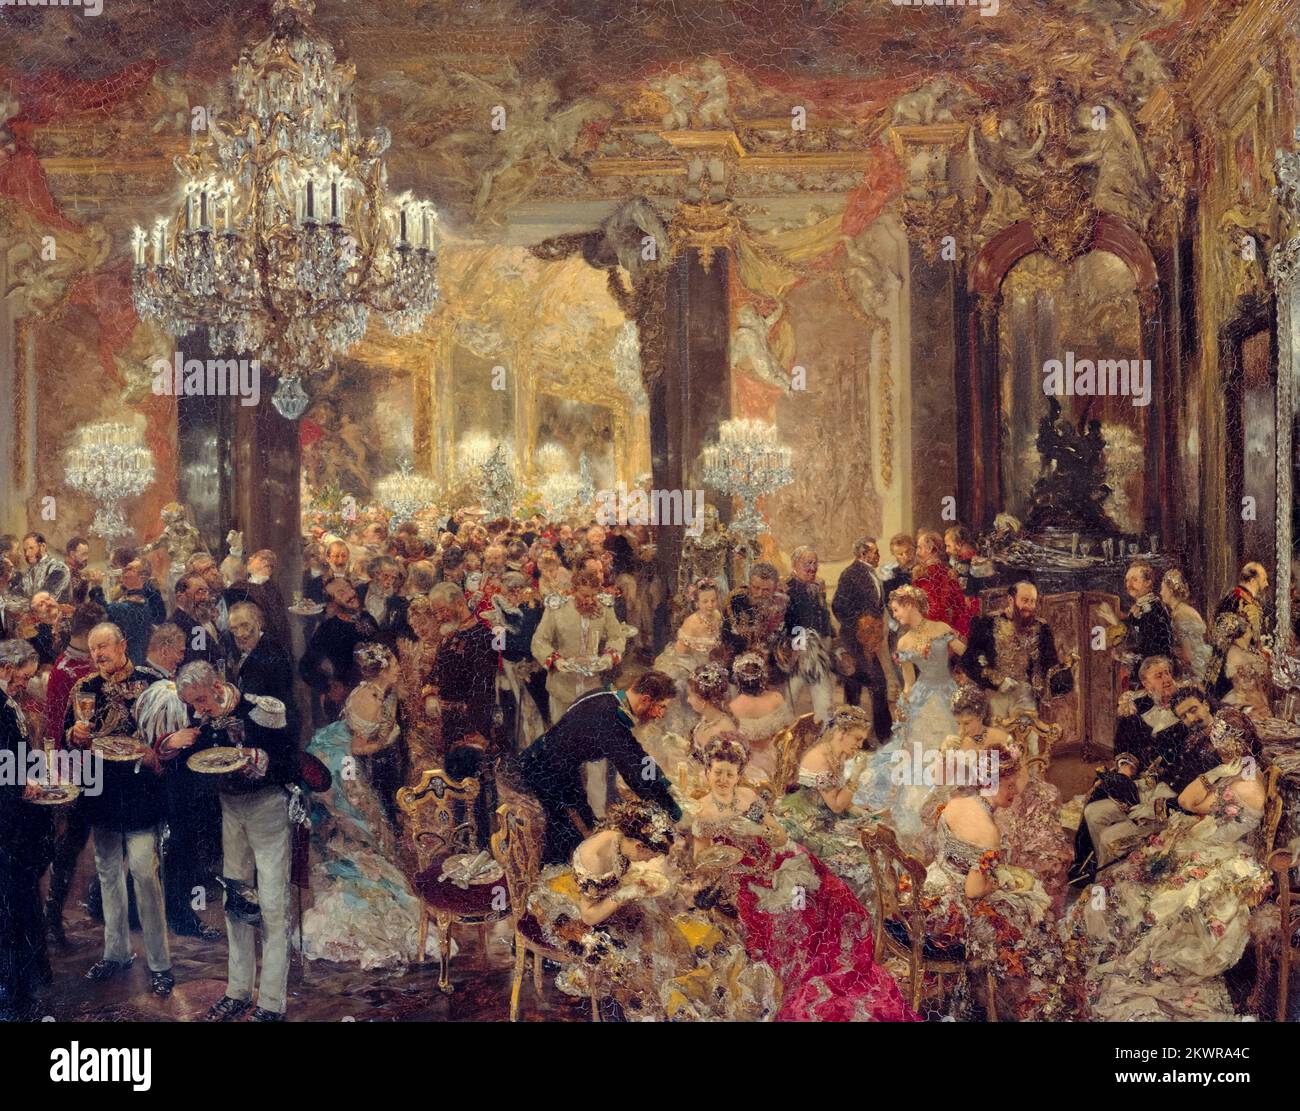 Adolph Menzel, The Dinner at the Ball, painting in oil on canvas, 1878 Stock Photo